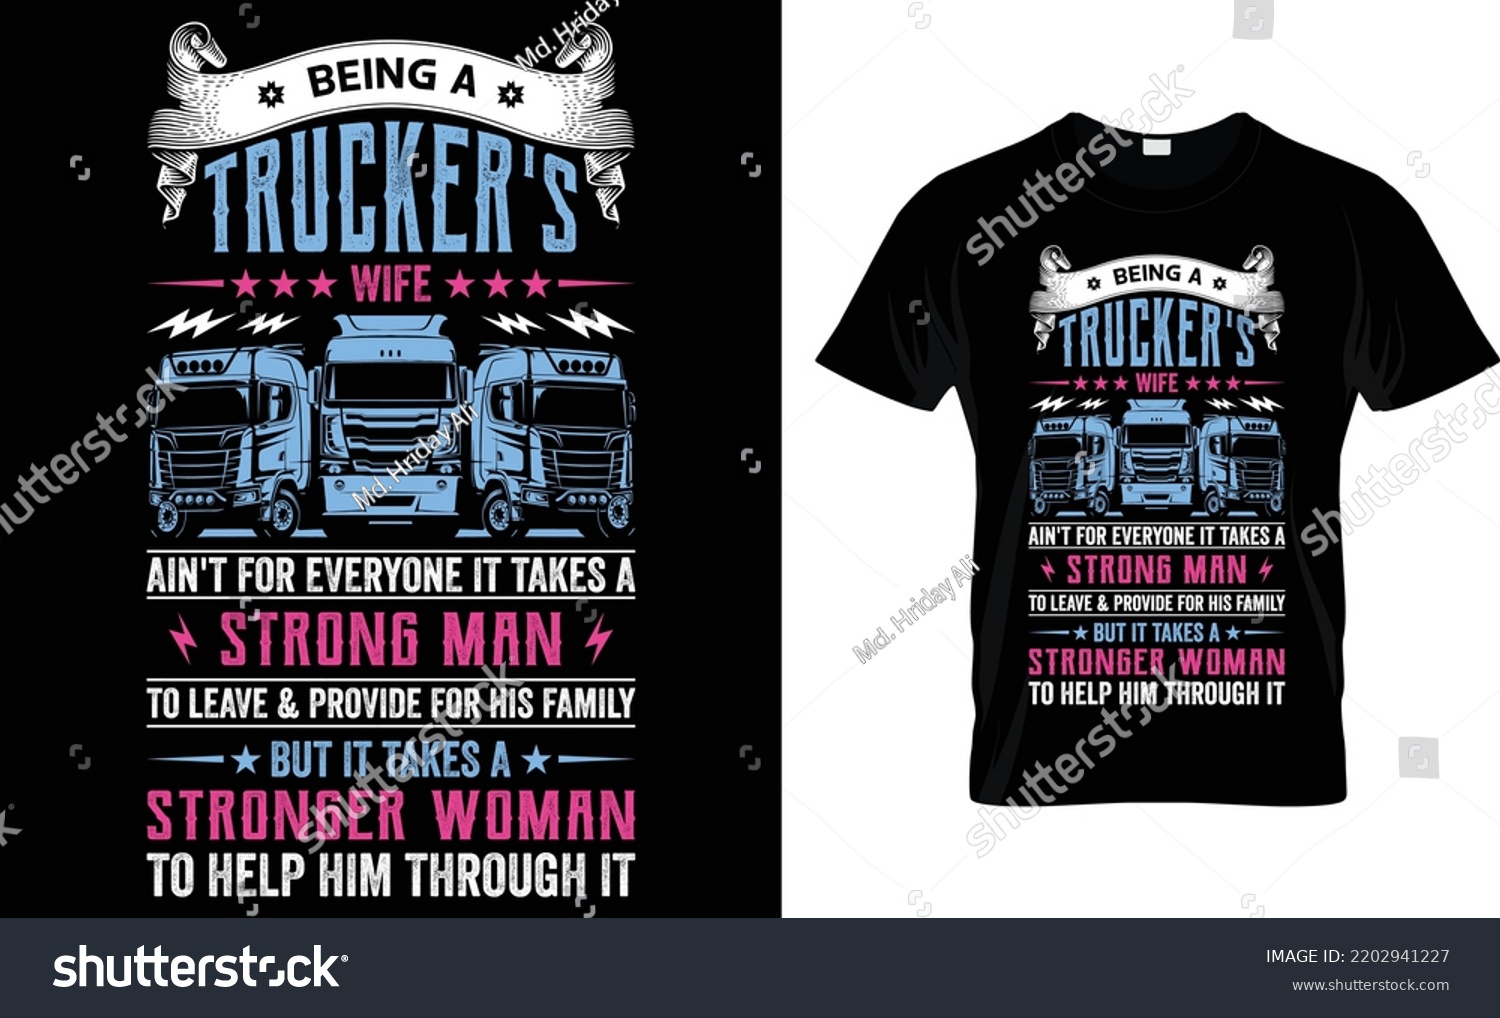 SVG of Being A Truckers Wife Ain't For Everyone It Takes A Strong Man To Leave And Provide For His Family But It Takes A Stronger Woman To Help Him Through It. svg